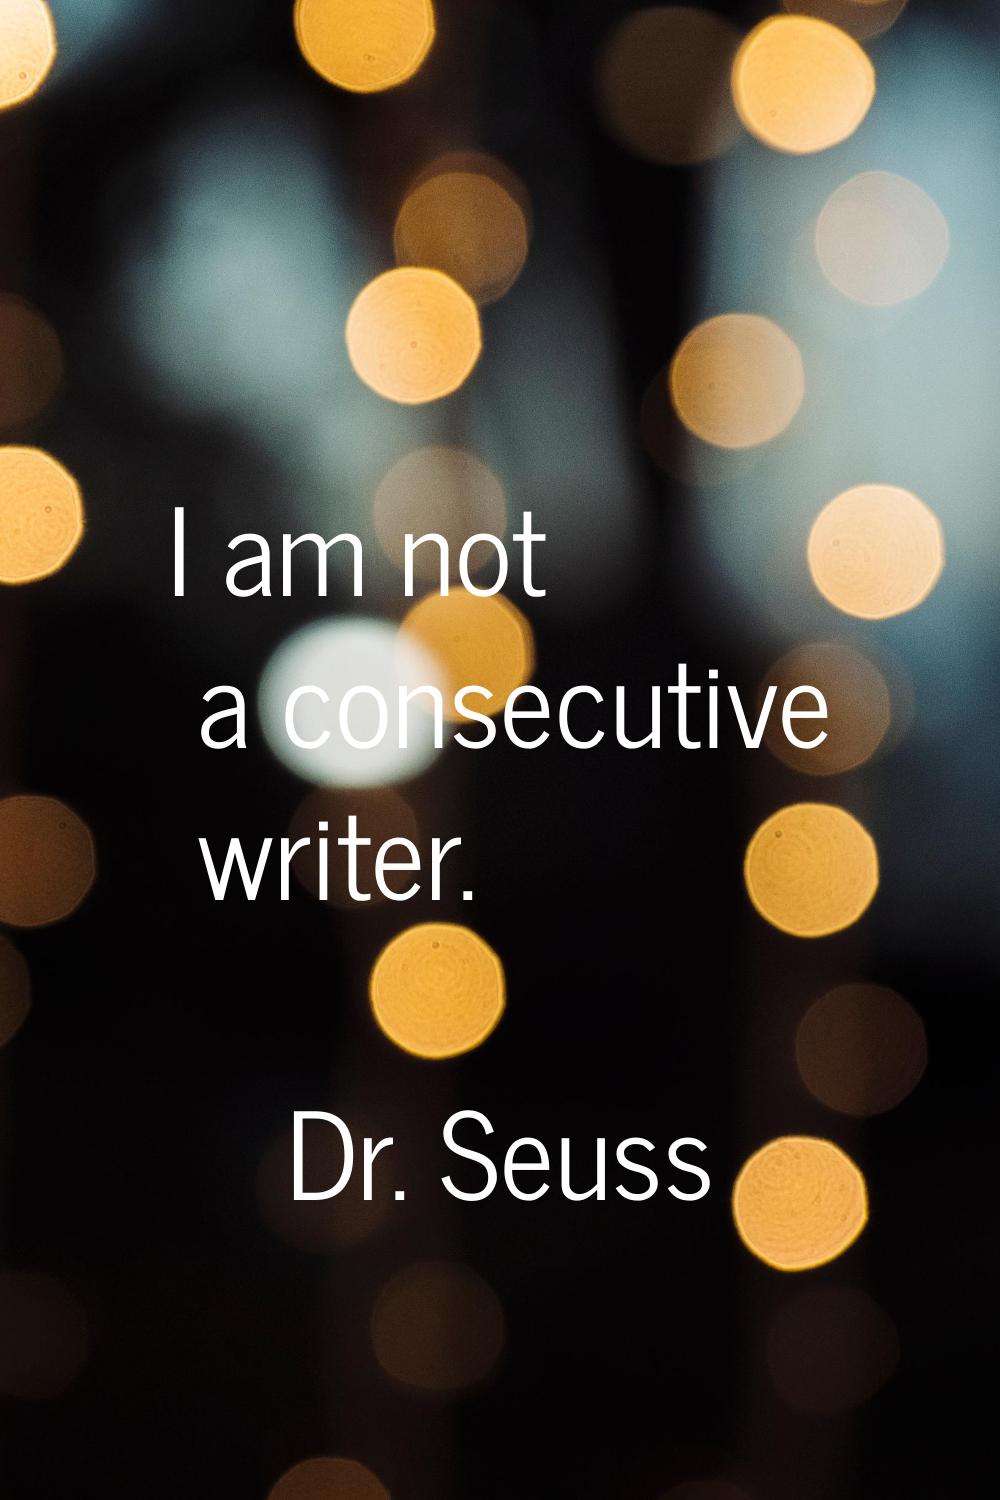 I am not a consecutive writer.